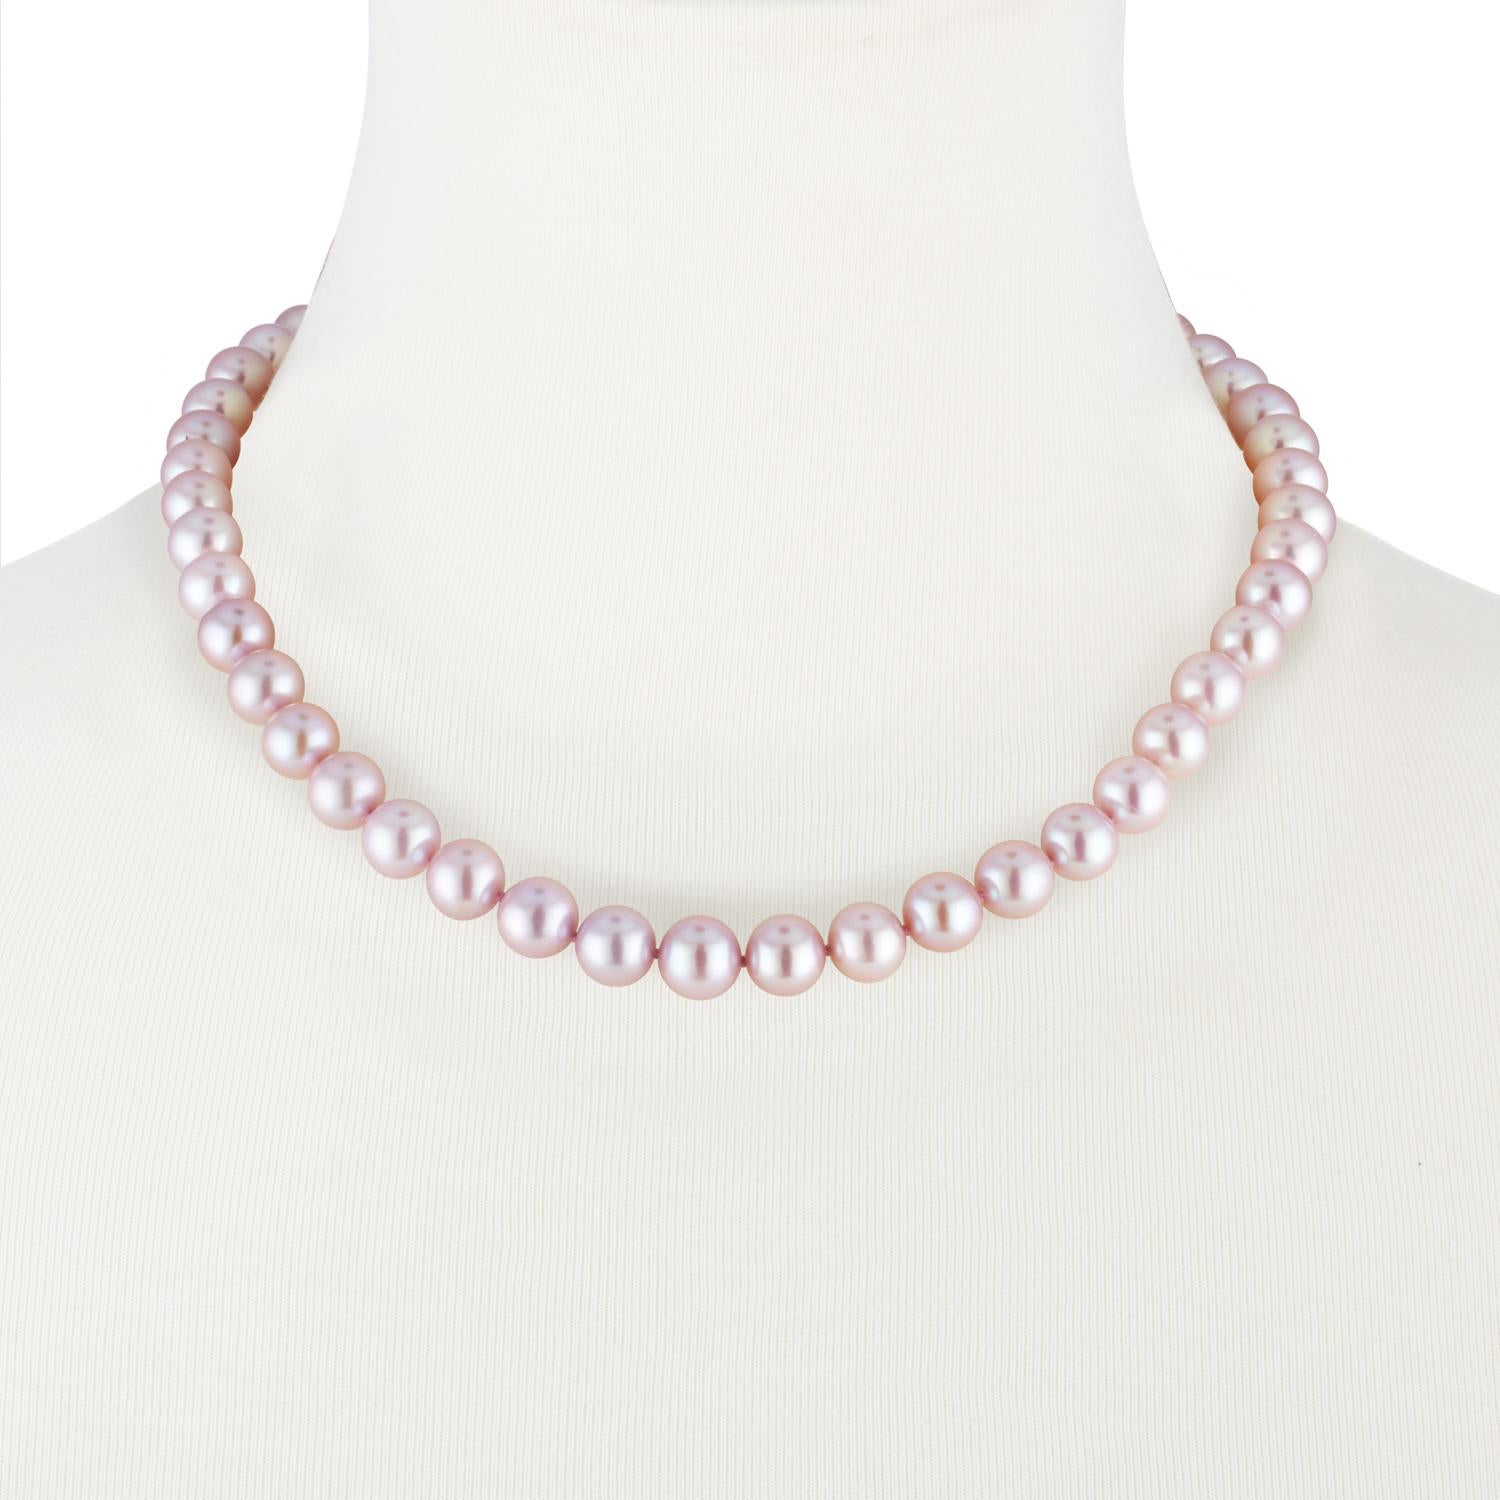 This exquisite Chinese freshwater cultured pearl necklace features distinctive, lustrous, natural color pink round pearls measuring 8.5x9.5mm. The necklace is strung with a classic 14K white gold filigree clasp.
This necklace makes the perfect